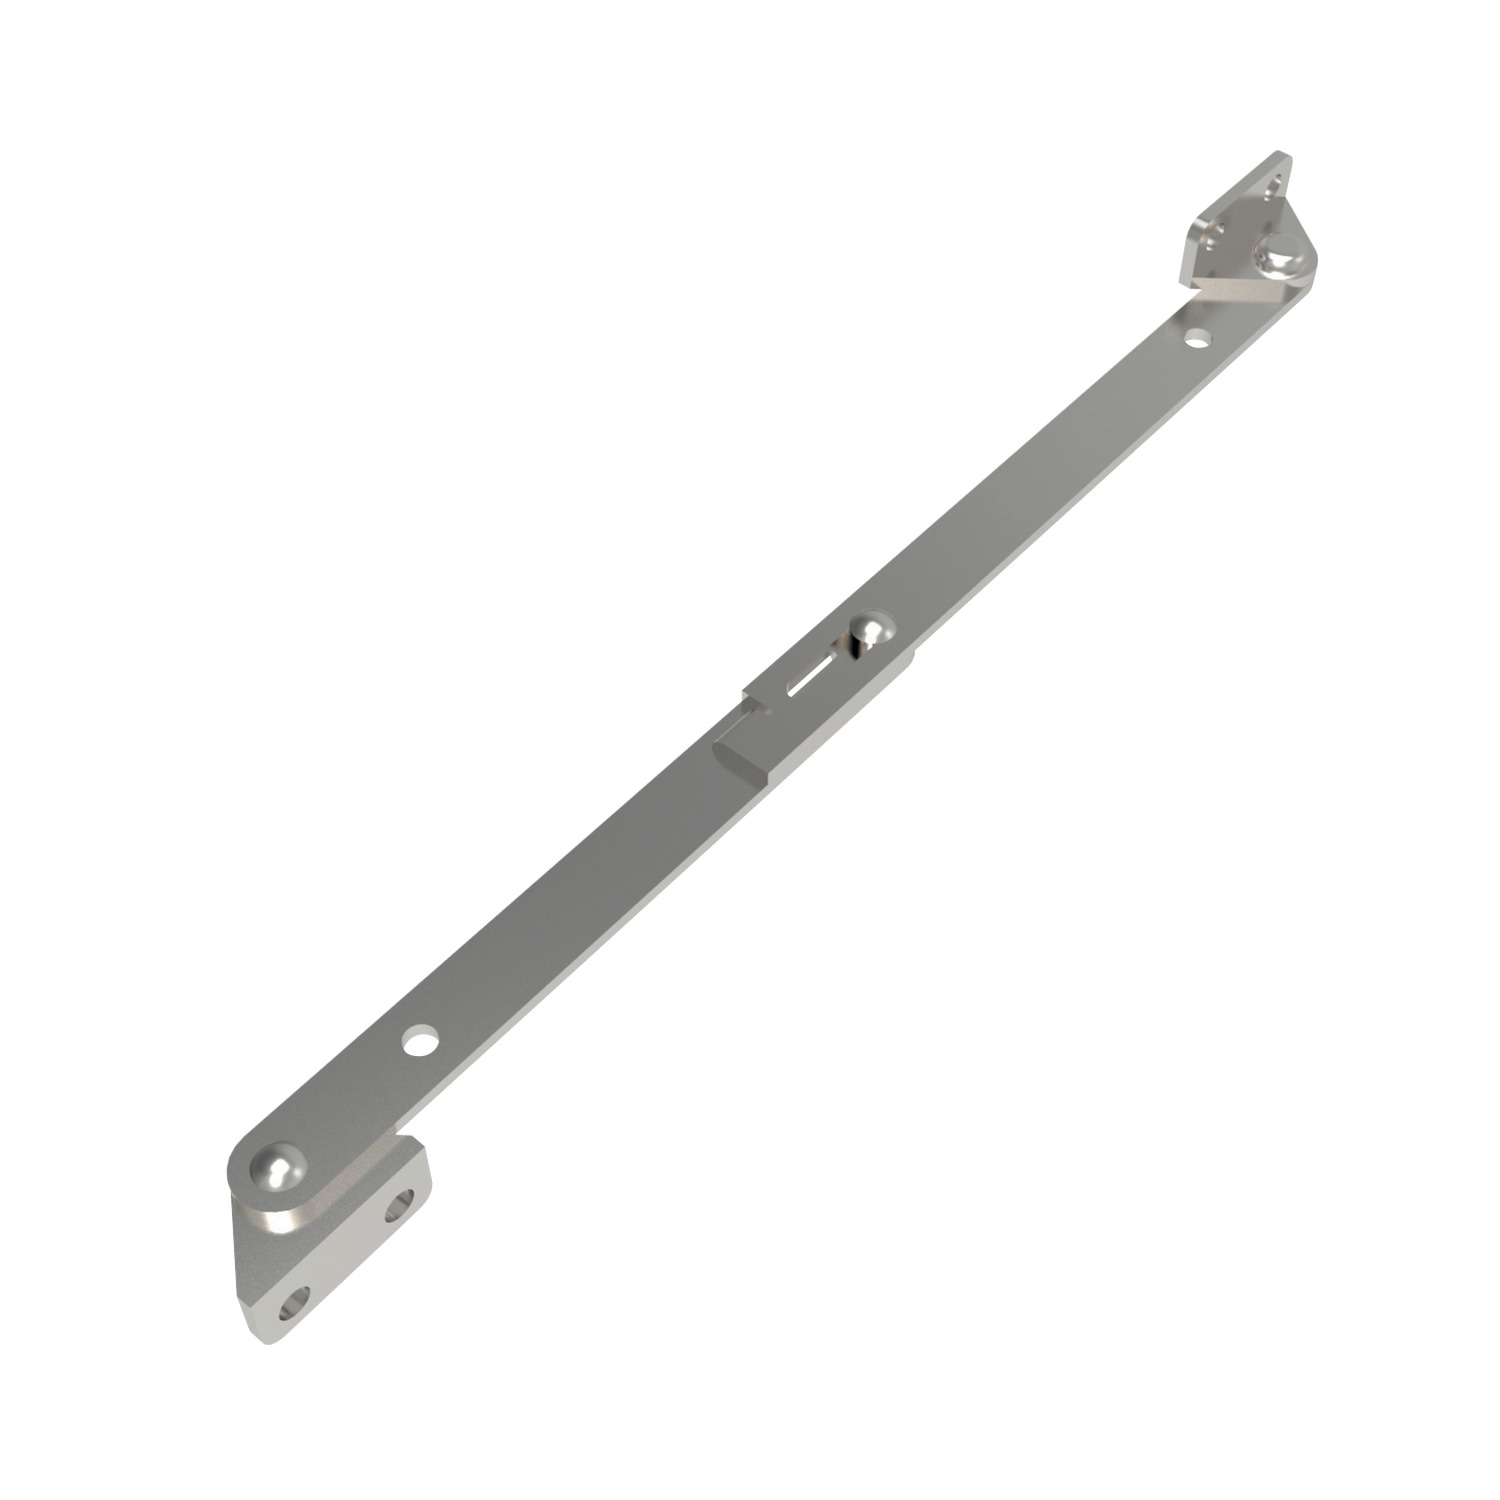 N0951.AW0010 Lid Stays stainless steel